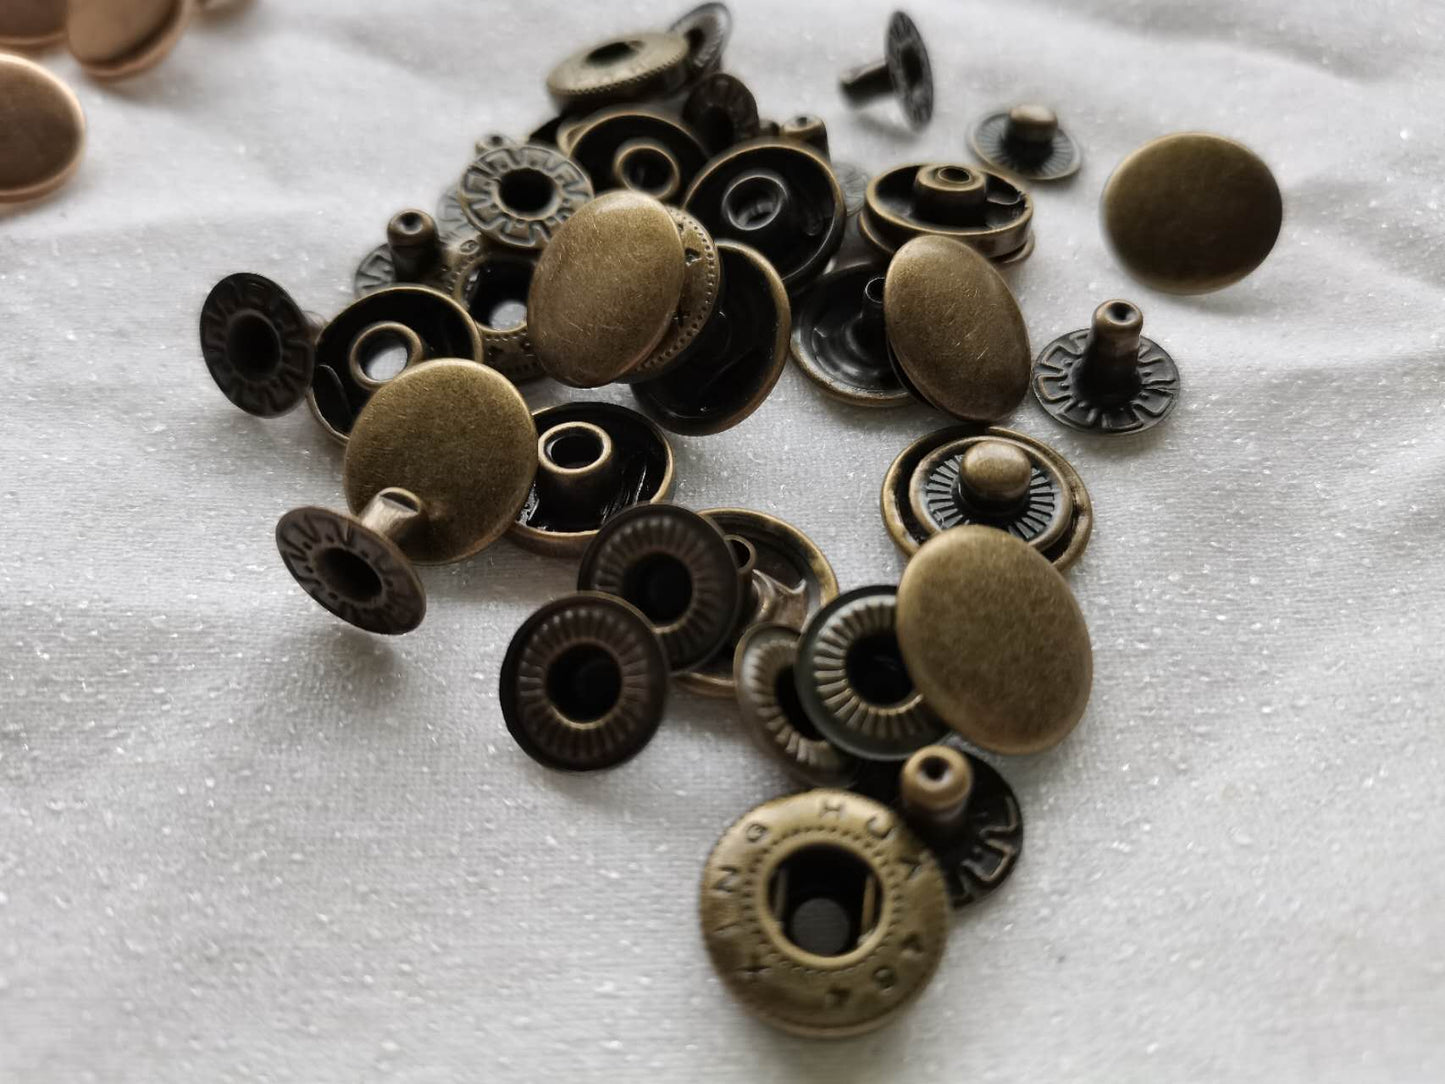 10 sets of heavy duty snap buttons, metal snaps, metal buttons, metal clasps for bags, jackets, snap button setting tool